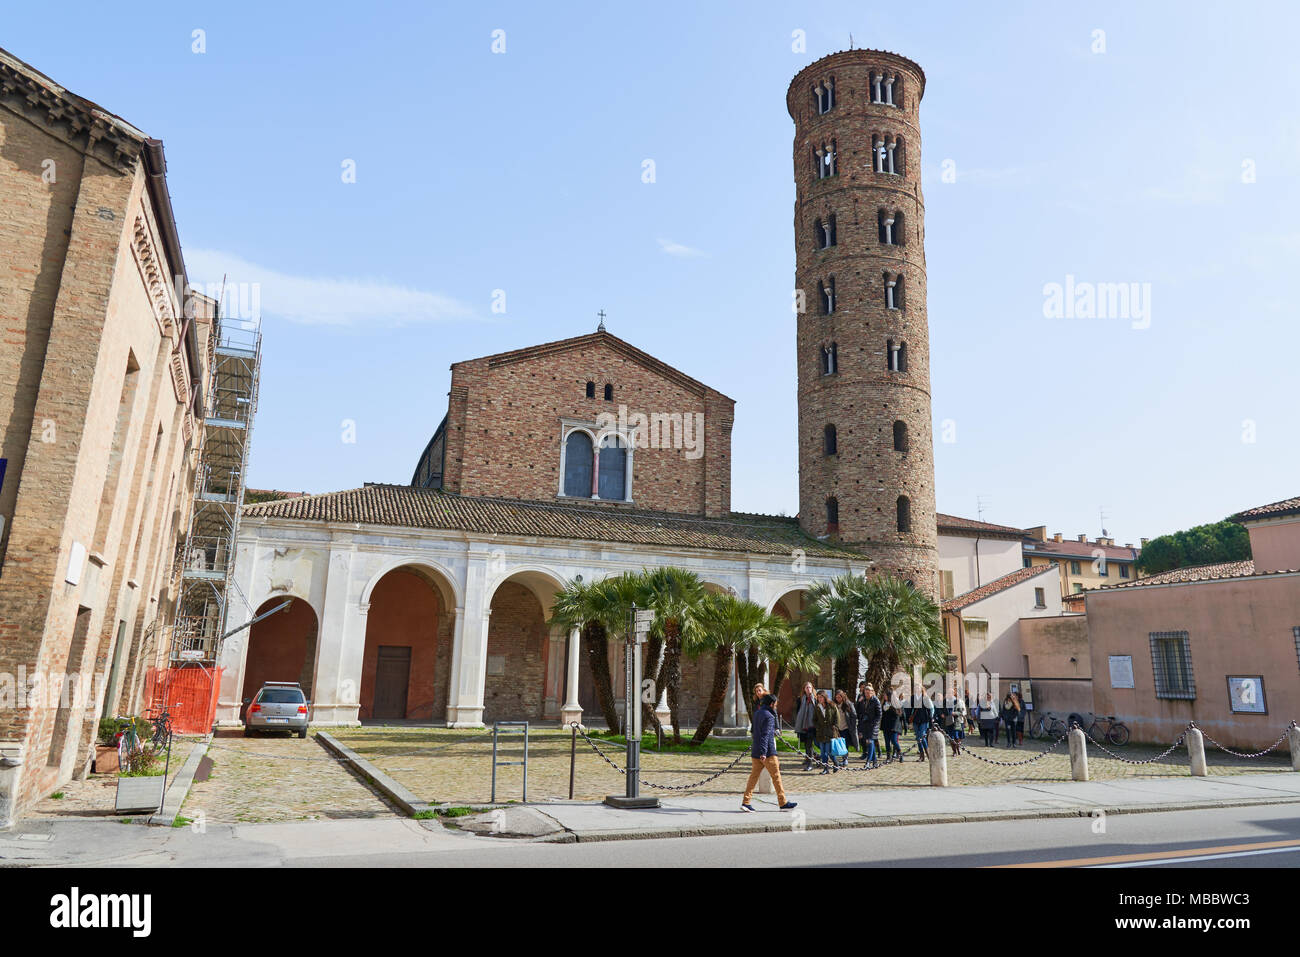 Ravenna, Italy - Febuary 18, 2016: Basilica of Sant' Apollinare Nuovo, a 6th-century Church built by Theodoric the Great as his palace-chapel, listed  Stock Photo